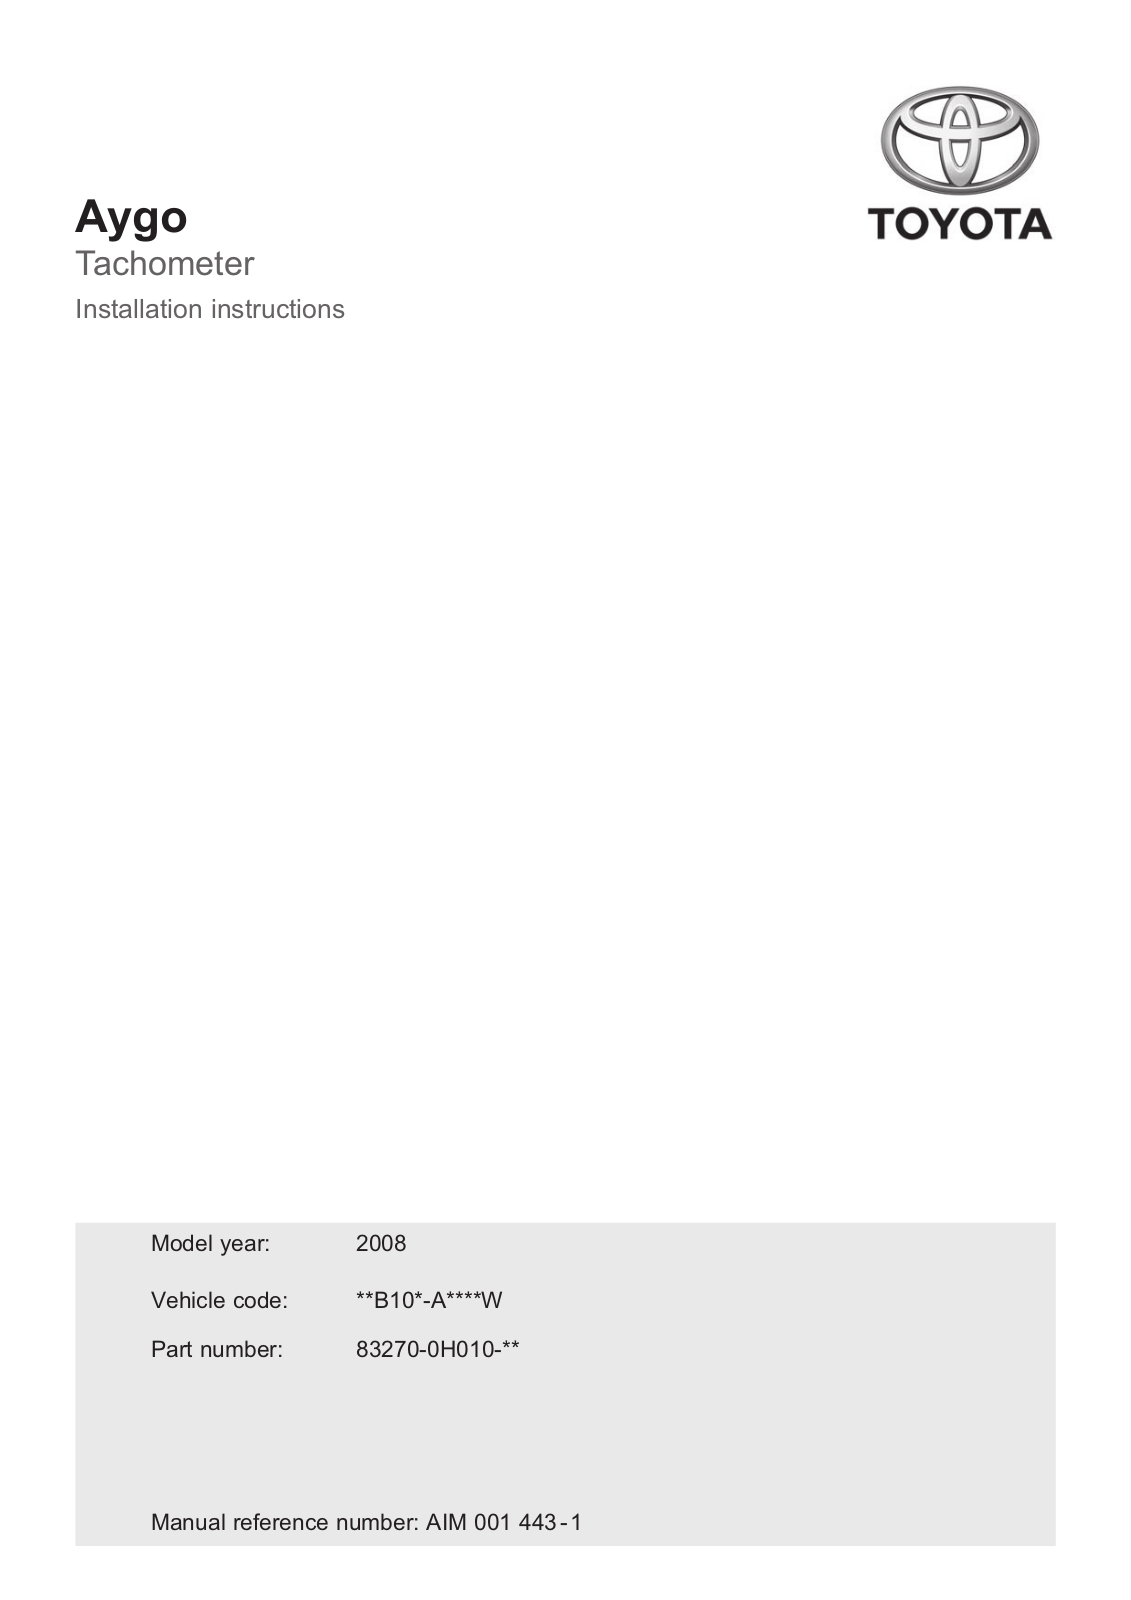 Toyota Aygo Tachometer 2008 Owner's Manual